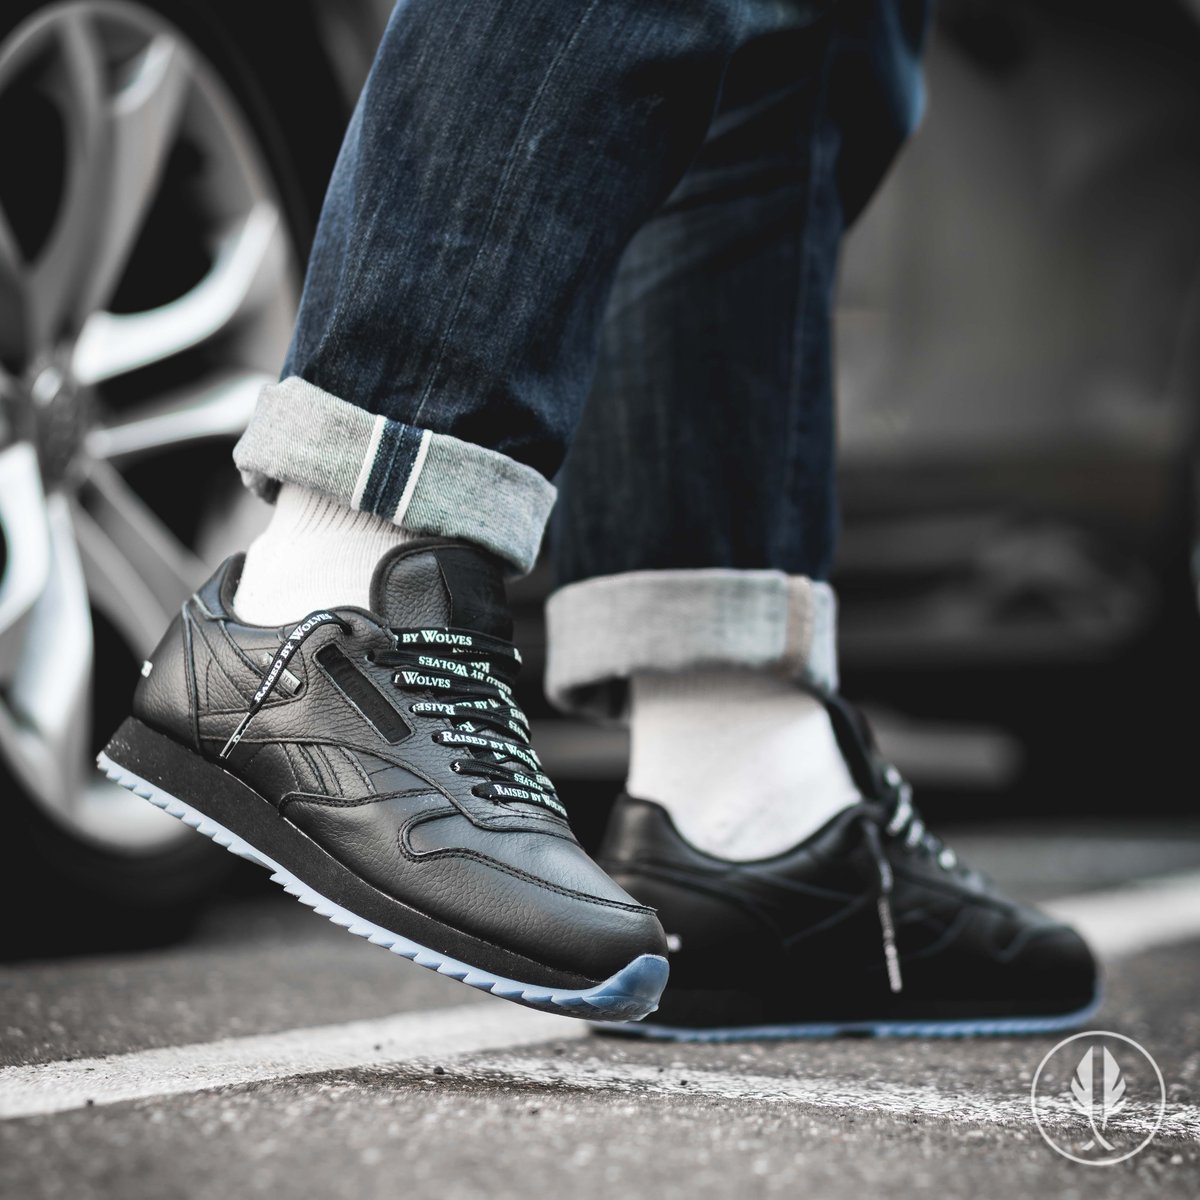 raised by wolves x reebok classic leather ripple gtx